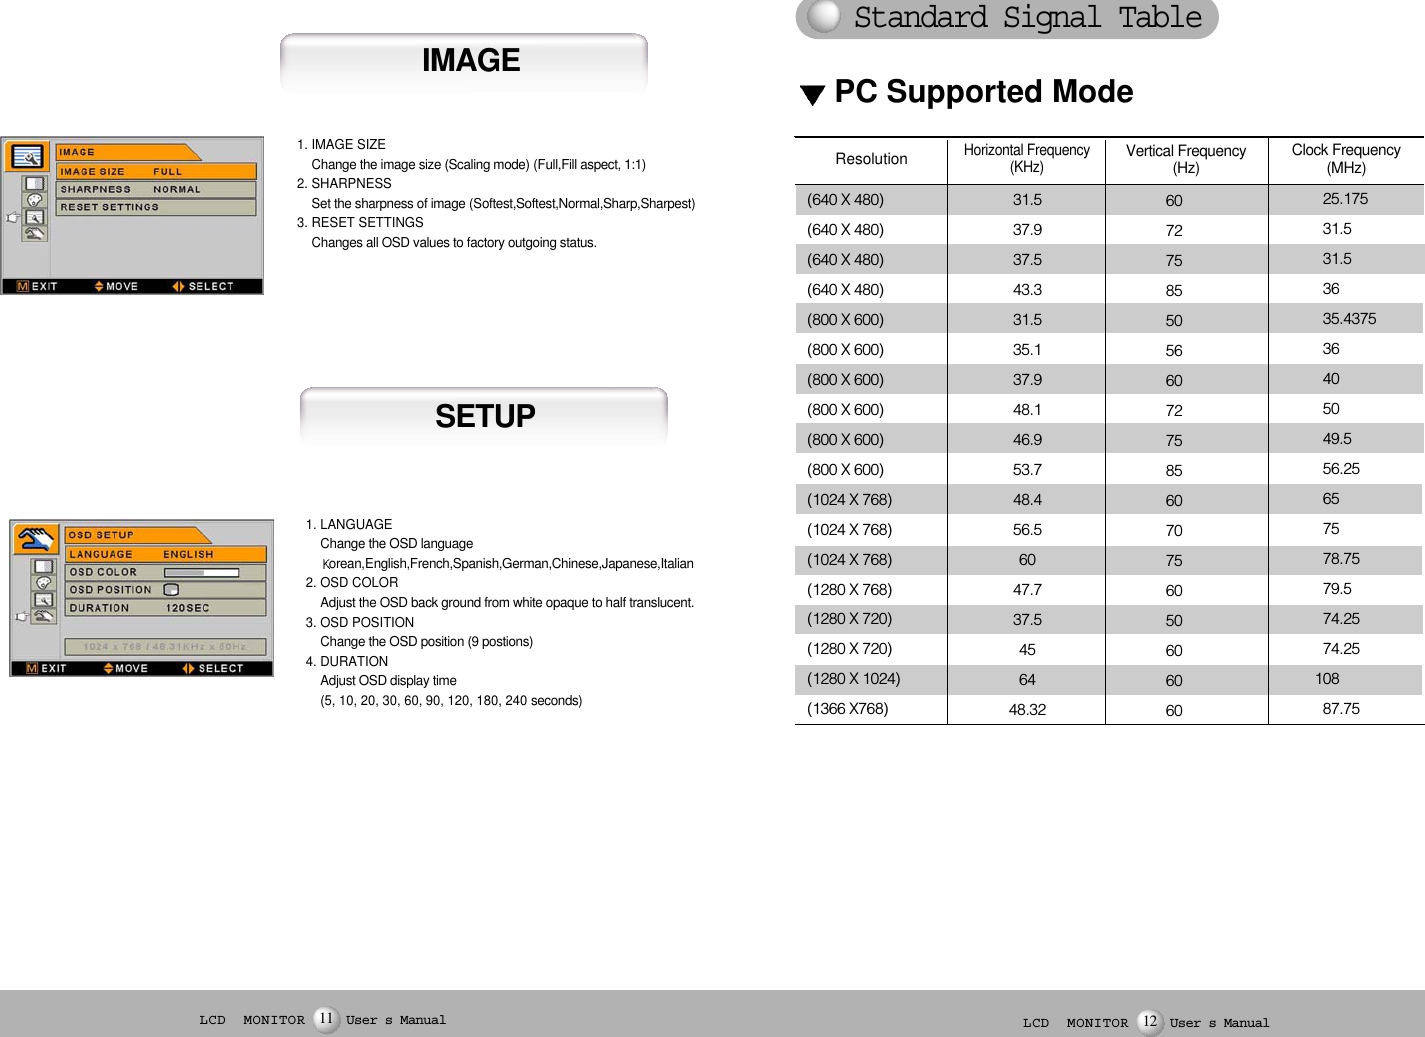 LCD  MONITOR User s Manual11 LCD  MONITOR User s Manual12(640 X 480)(640 X 480)(640 X 480)(640 X 480)(800 X 600)(800 X 600)(800 X 600)(800 X 600)(800 X 600)(800 X 600)(1024 X 768)(1024 X 768)(1024 X 768)(1280 X 768)(1280 X 720)(1280 X 720)(1280 X 1024)(1366 X768)31.537.937.543.331.535.137.948.146.953.748.456.56047.737.5456448.3260727585505660727585607075605060606025.17531.531.53635.437536405049.556.25657578.7579.574.2574.2510887.75ResolutionHorizontal Frequency (KHz)Vertical Frequency(Hz) Clock Frequency(MHz)PC Supported ModeSETUP1. IMAGE SIZEChange the image size (Scaling mode)(Full,Fill aspect, 1:1)2. SHARPNESSSet the sharpness of image(Softest,Softest,Normal,Sharp,Sharpest)3. RESET SETTINGSChanges all OSD values to factory outgoing status.IMAGE1. LANGUAGEChange the OSD languageorean,English,French,Spanish,German,Chinese,Japanese,Italian2. OSD COLORAdjust the OSD back ground from white opaque to half translucent.3. OSD POSITIONChange the OSD position (9 postions)4. DURATIONAdjust OSD display time(5, 10, 20, 30, 60, 90, 120, 180, 240 seconds)Standard Signal Table